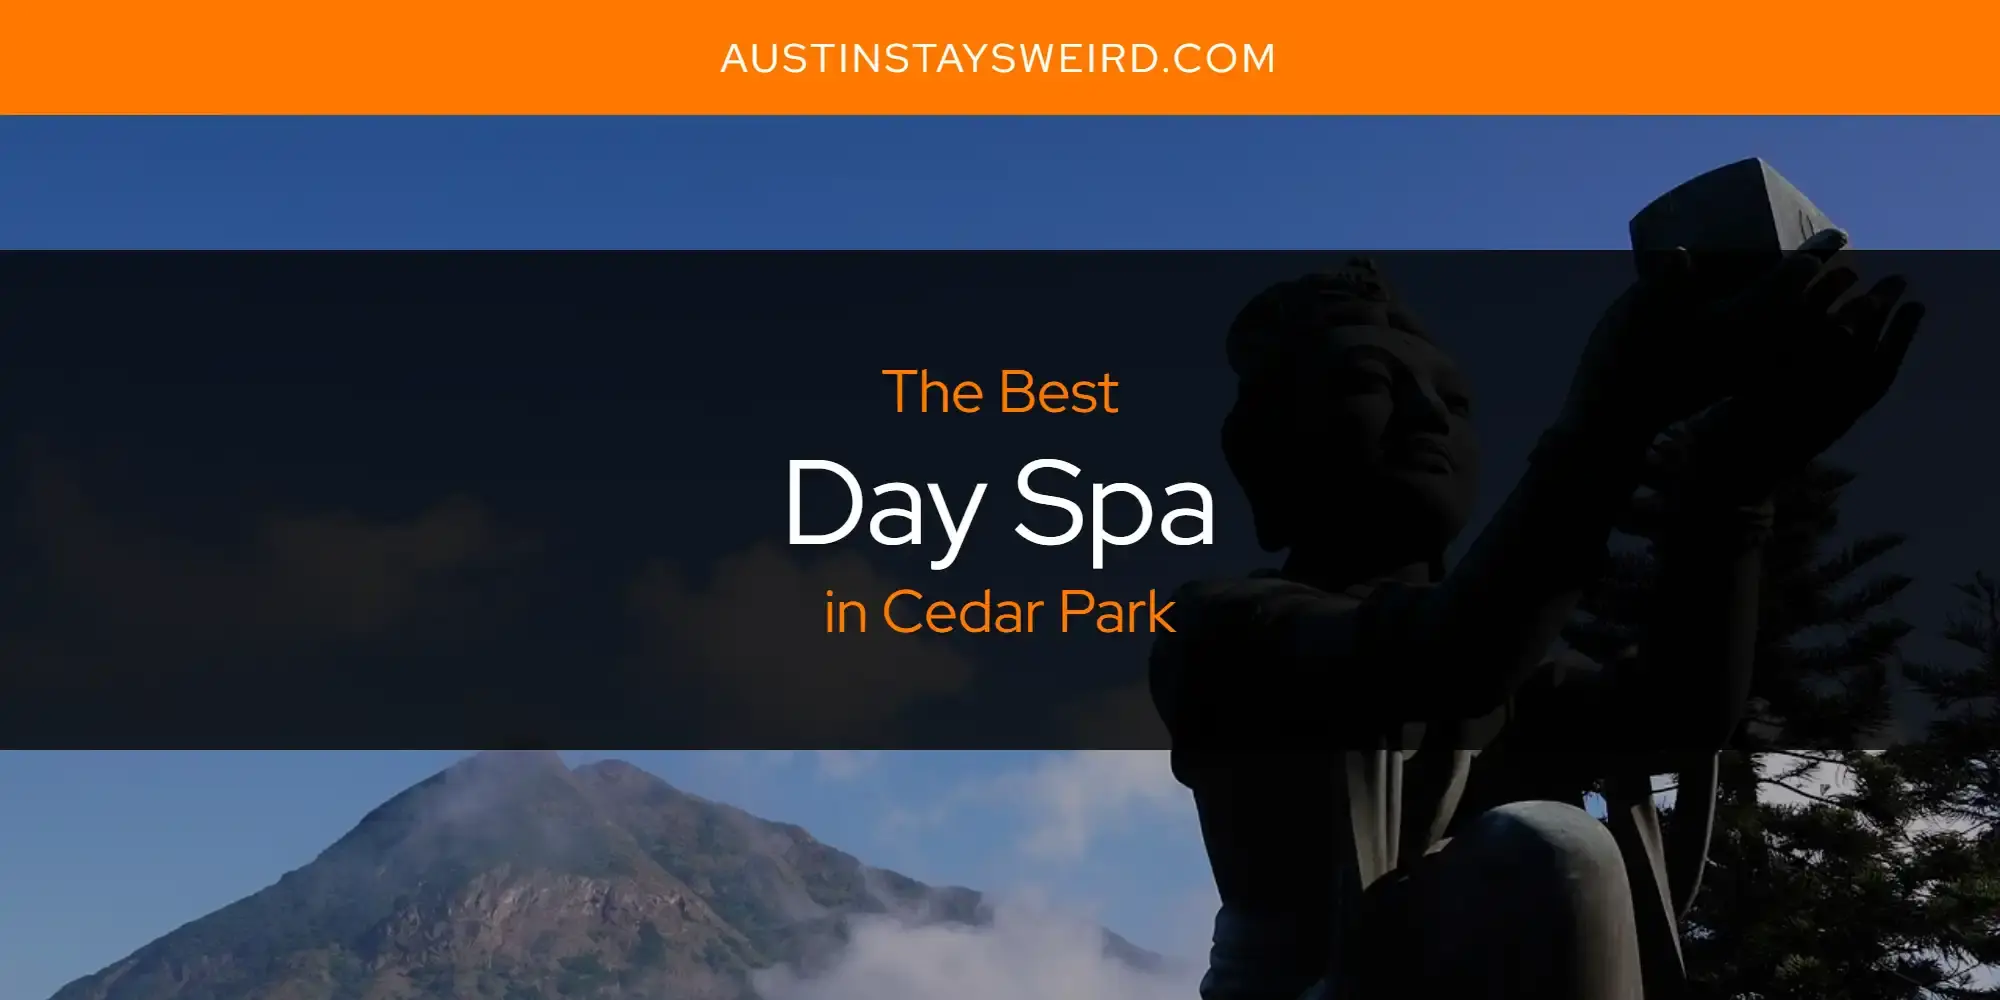 Best Day Spa in Cedar Park? Here's the Top 8